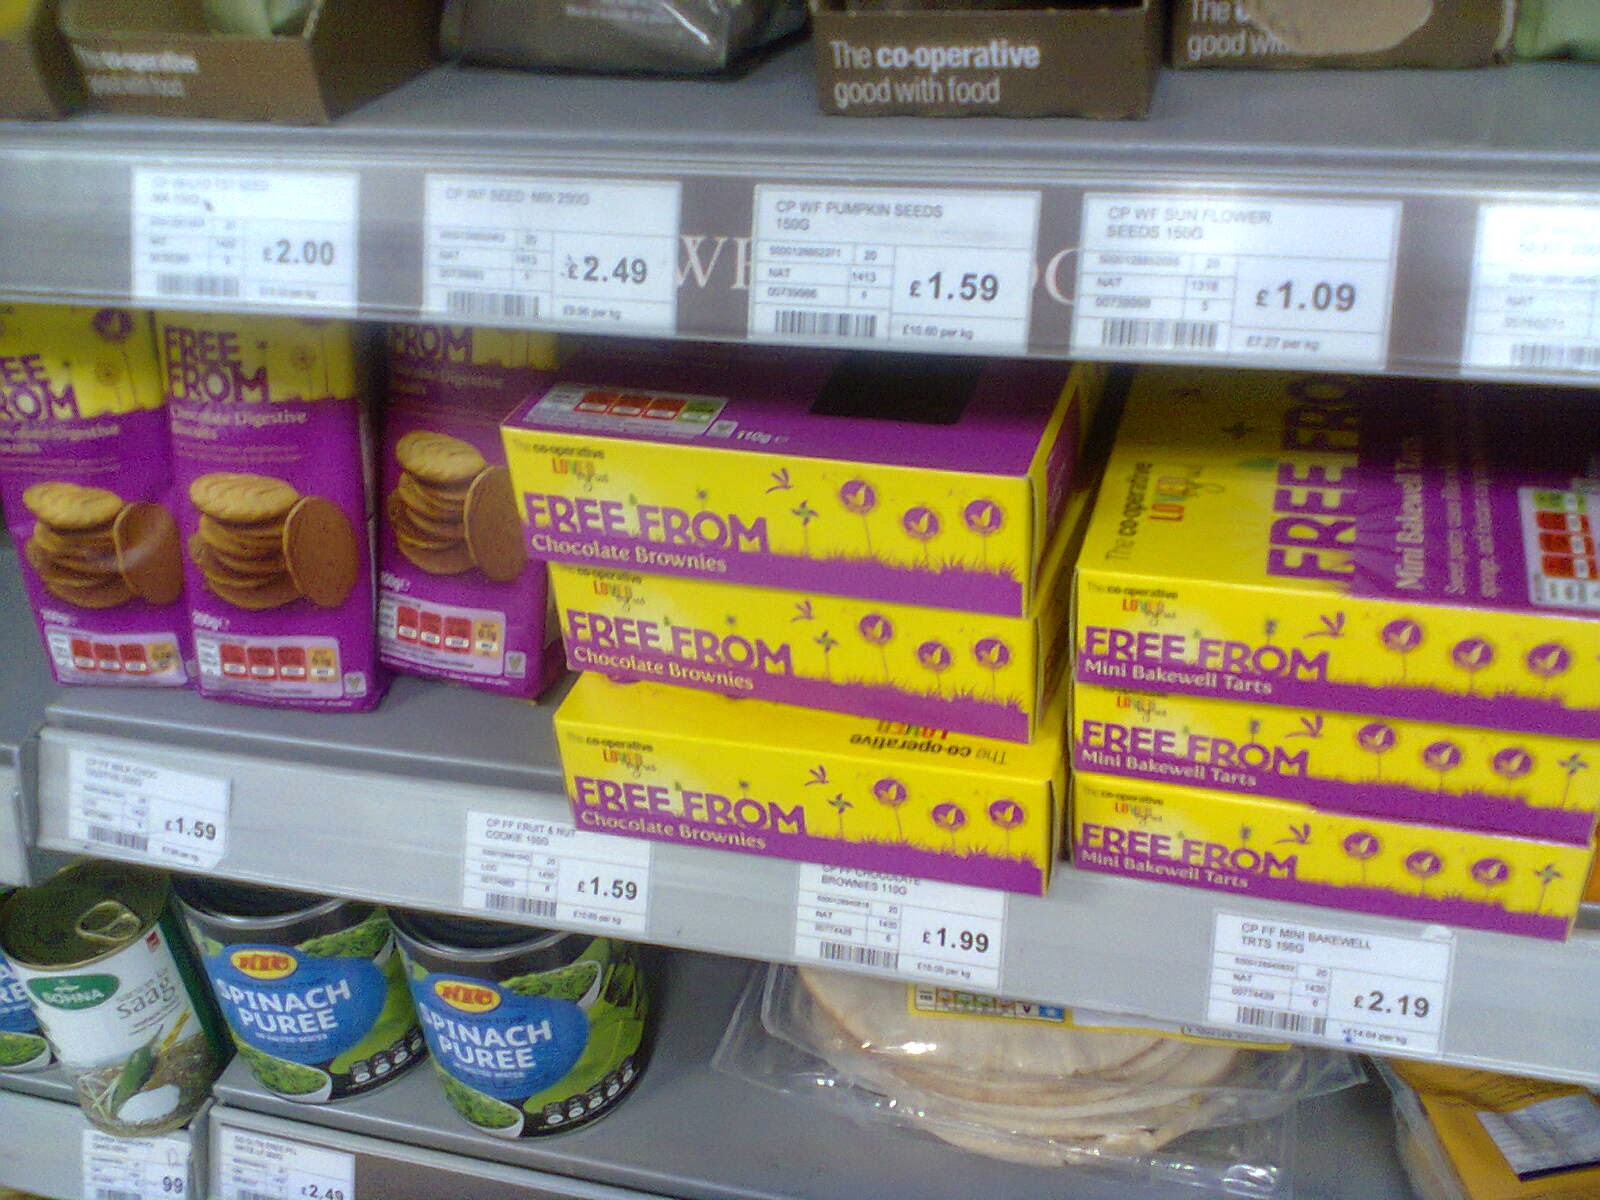 Three of the newly re-branded Free From products at the Co-operative